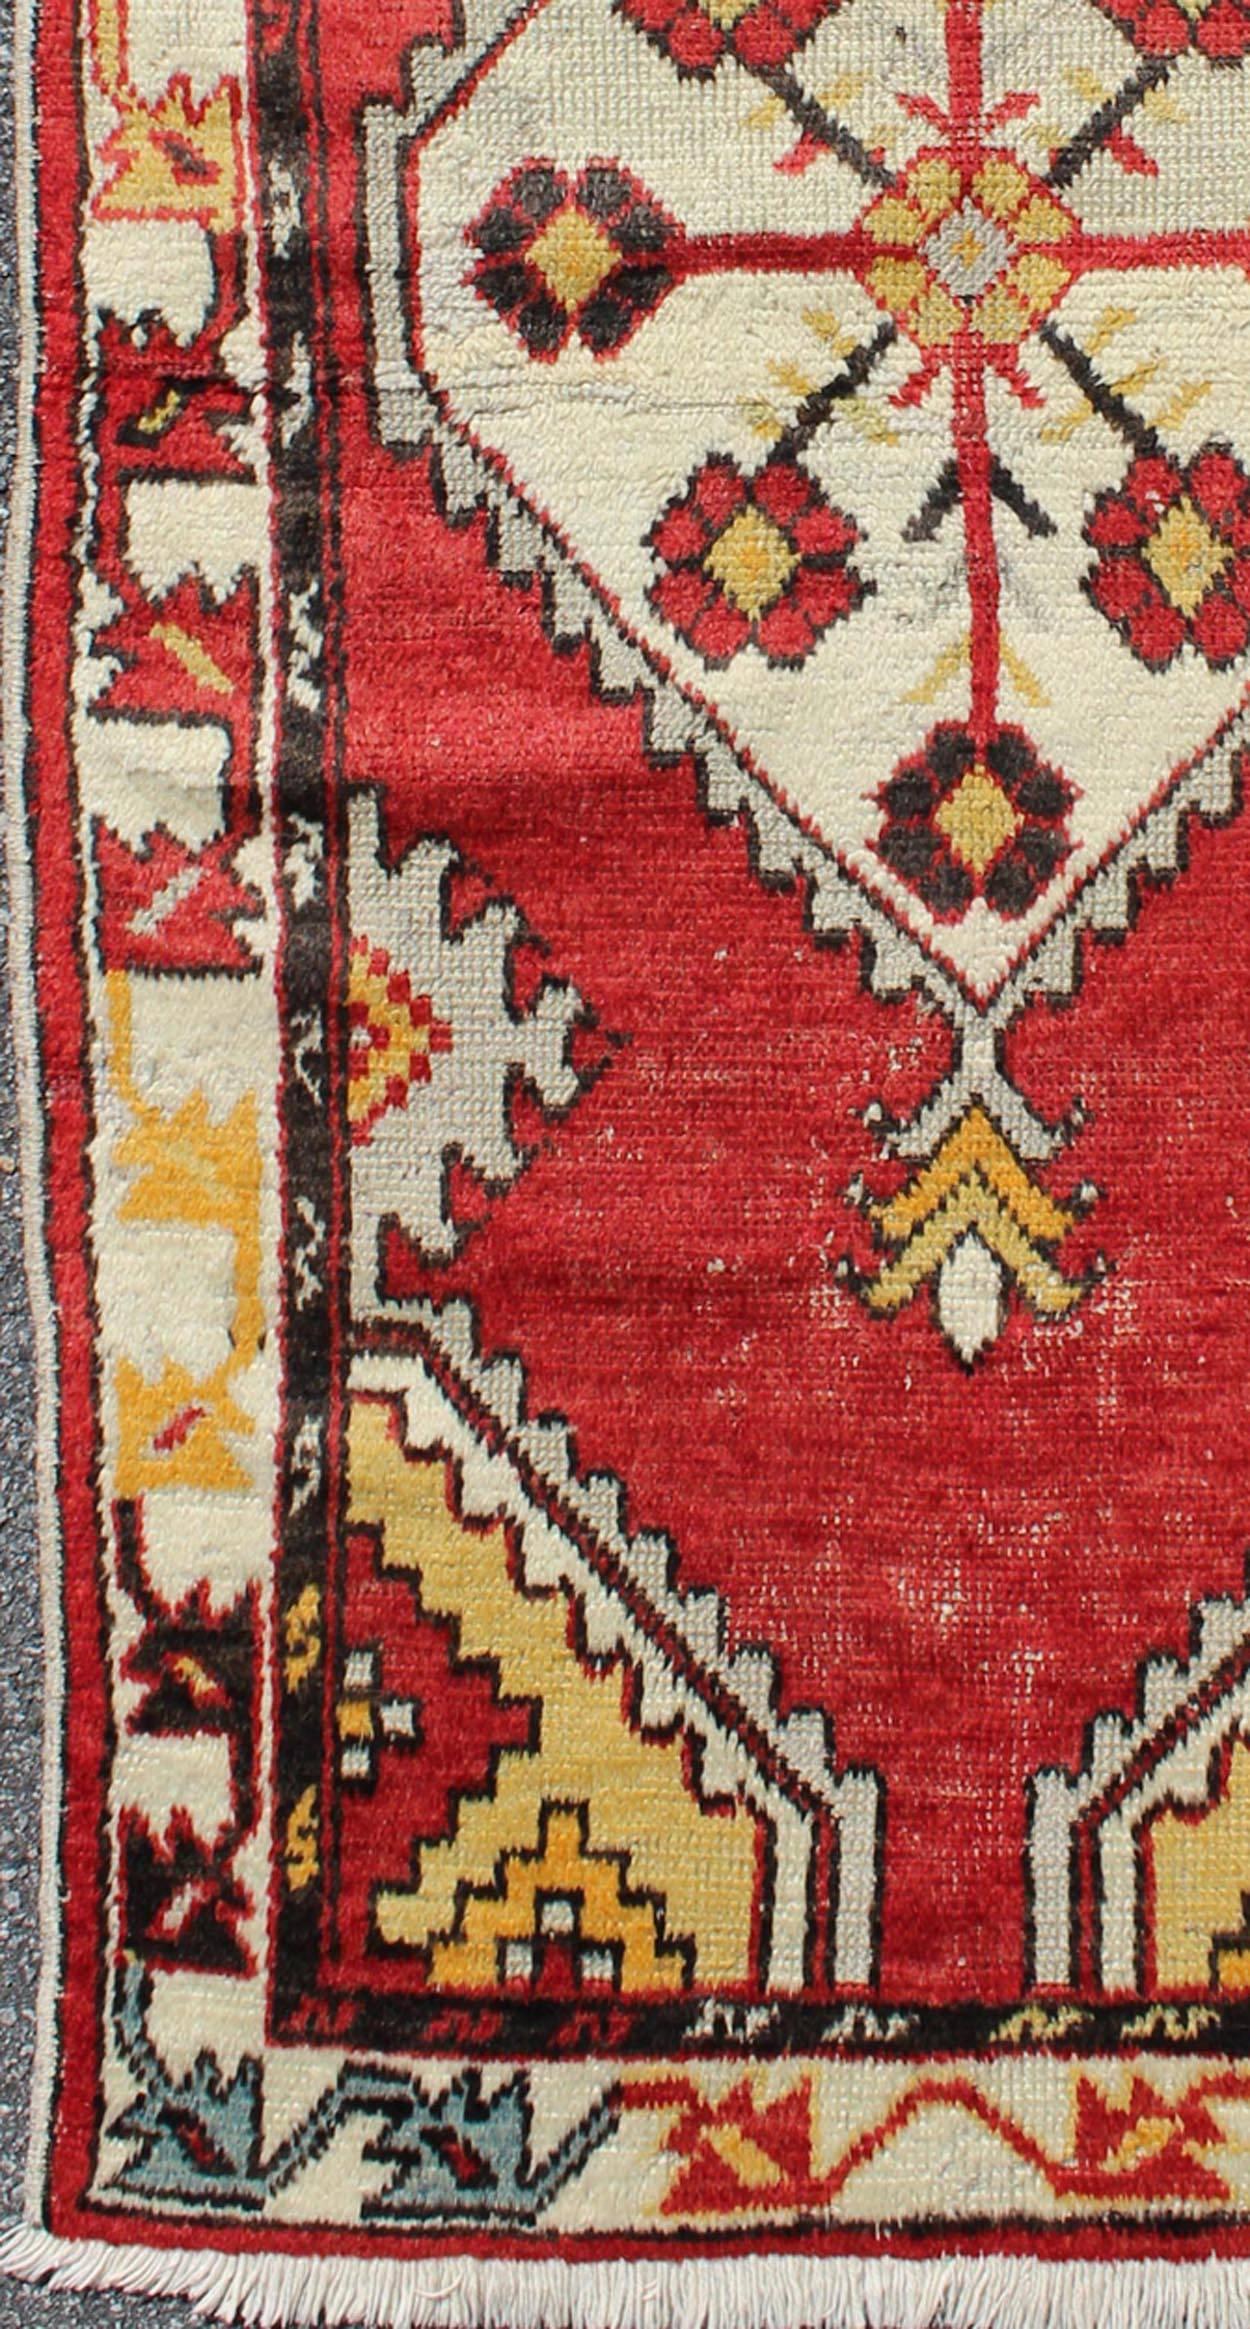 1930s Tribal Medallion vintage Turkish Oushak rug in red, brown, gray, yellow, rug H-602-21, country of origin / type: Turkey / Oushak, circa 1930

This vintage Turkish Oushak carpet (circa 1930) features a central medallion design, as well as